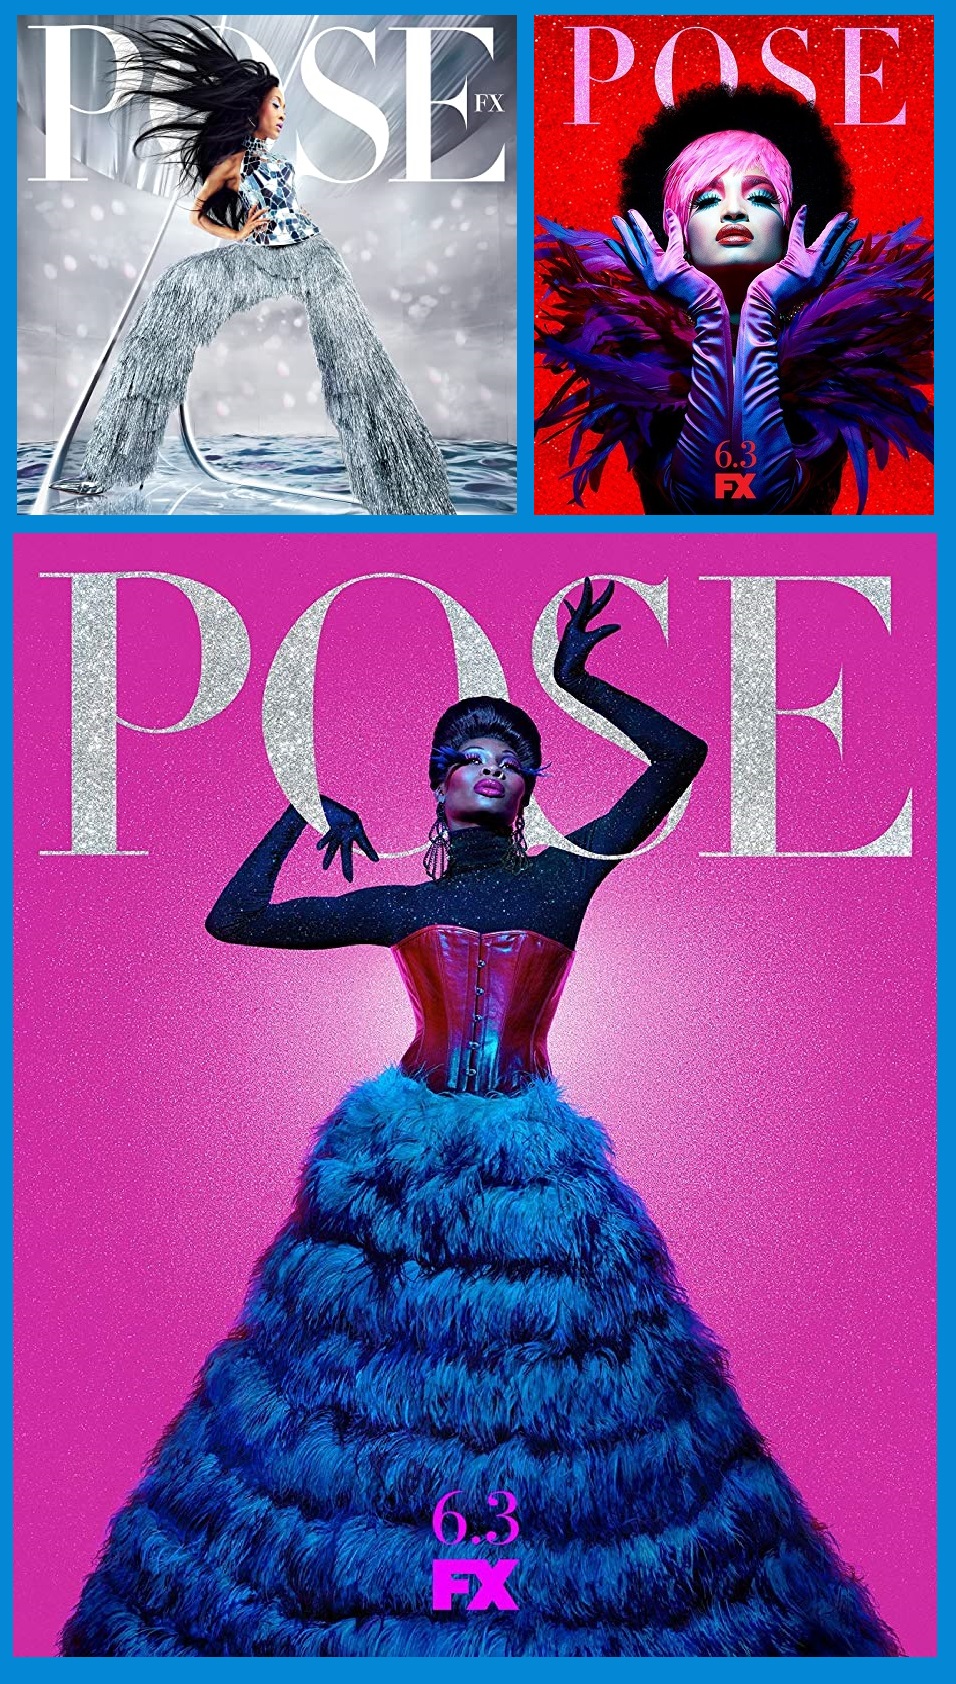 Pose: Season 3 (Oh Happy Day / This Day / To God Be the Glory)